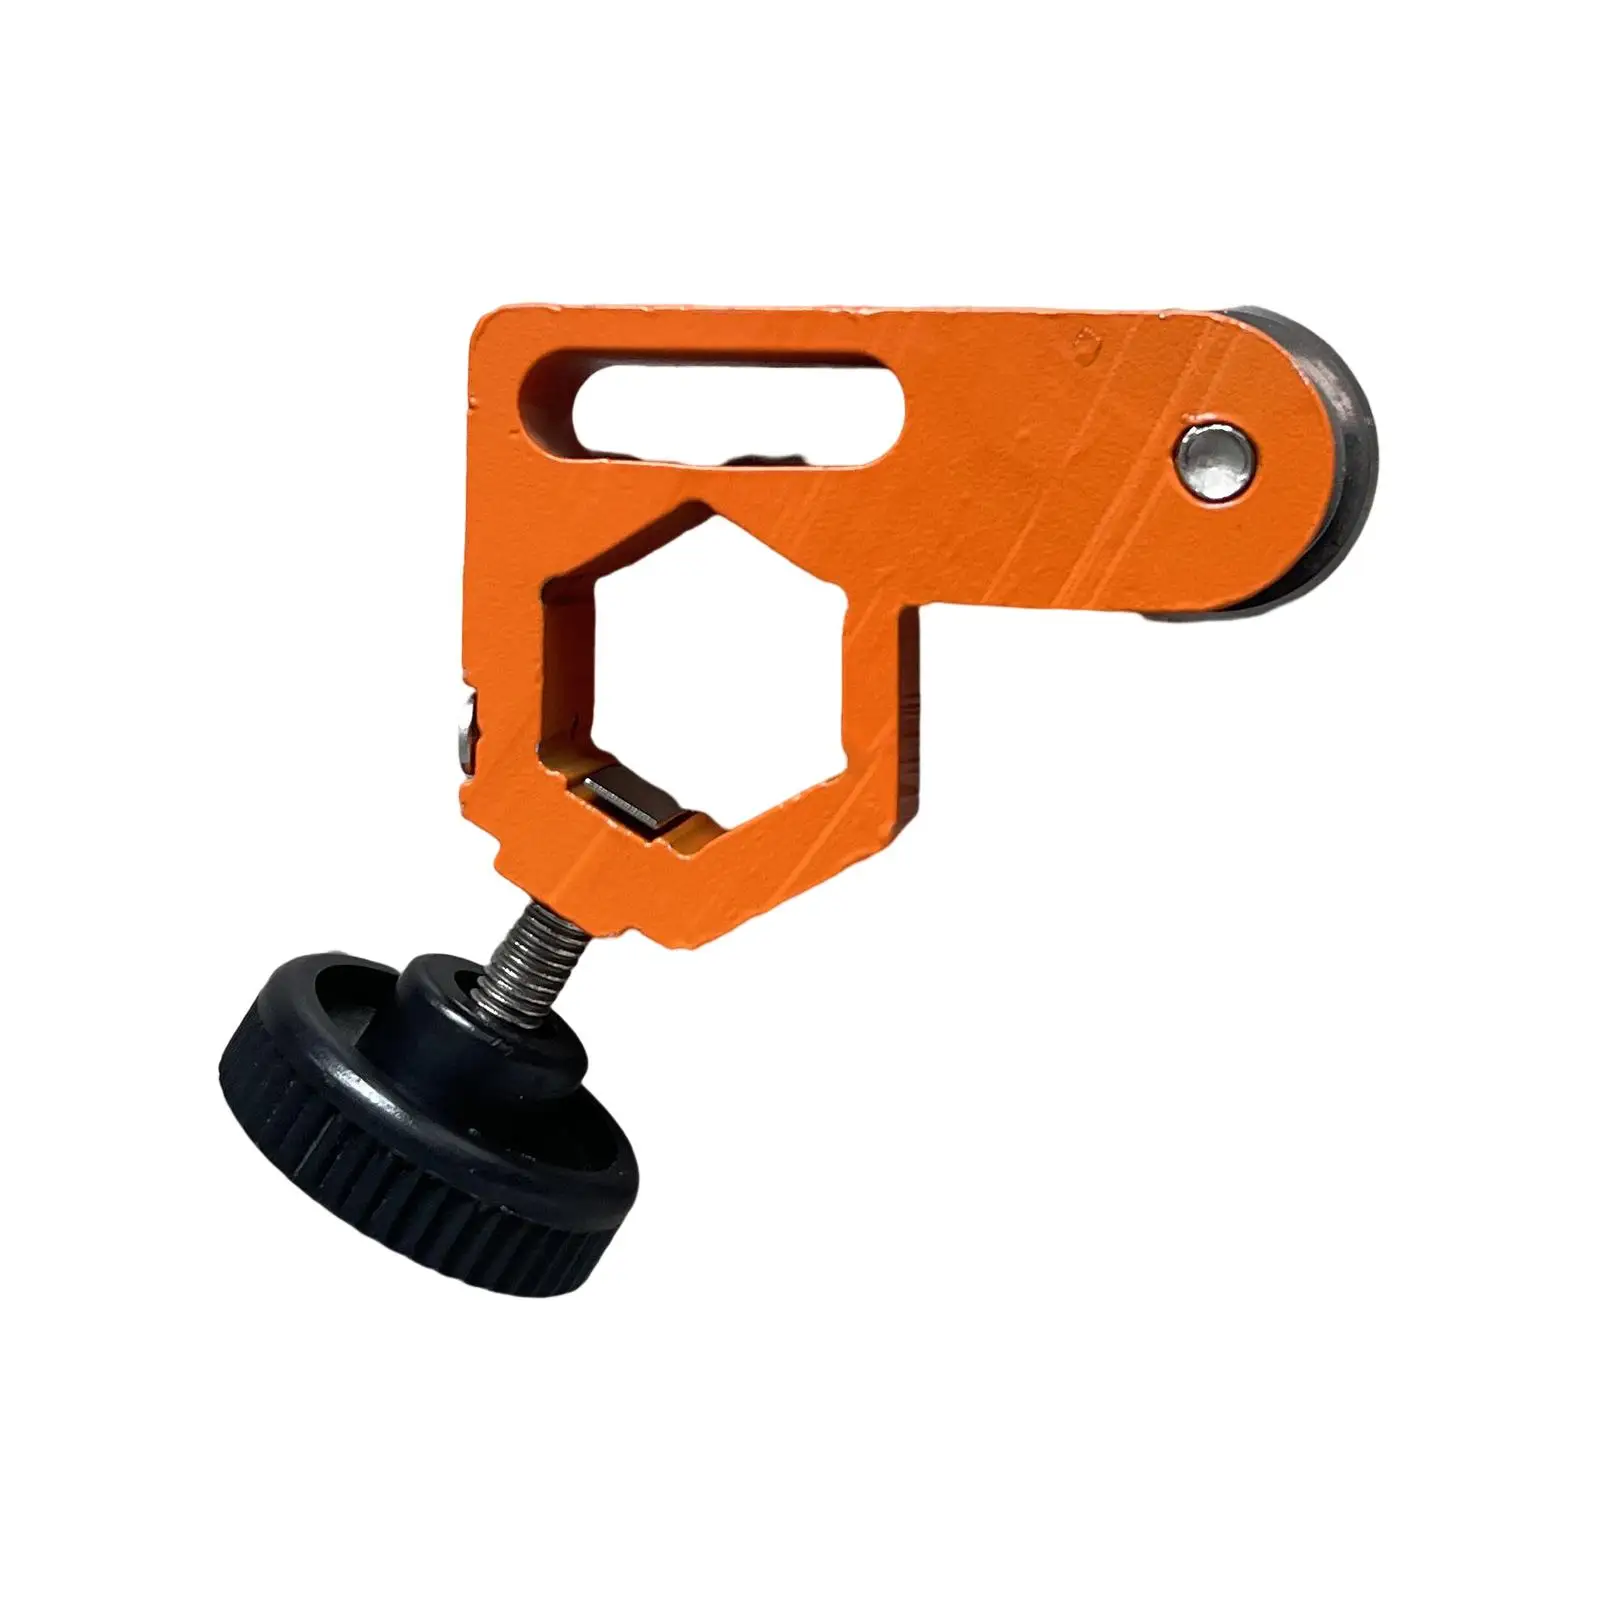 Glass Cutter Manual Portable Handheld Windows Easy to Glide Glass Breaker Glass